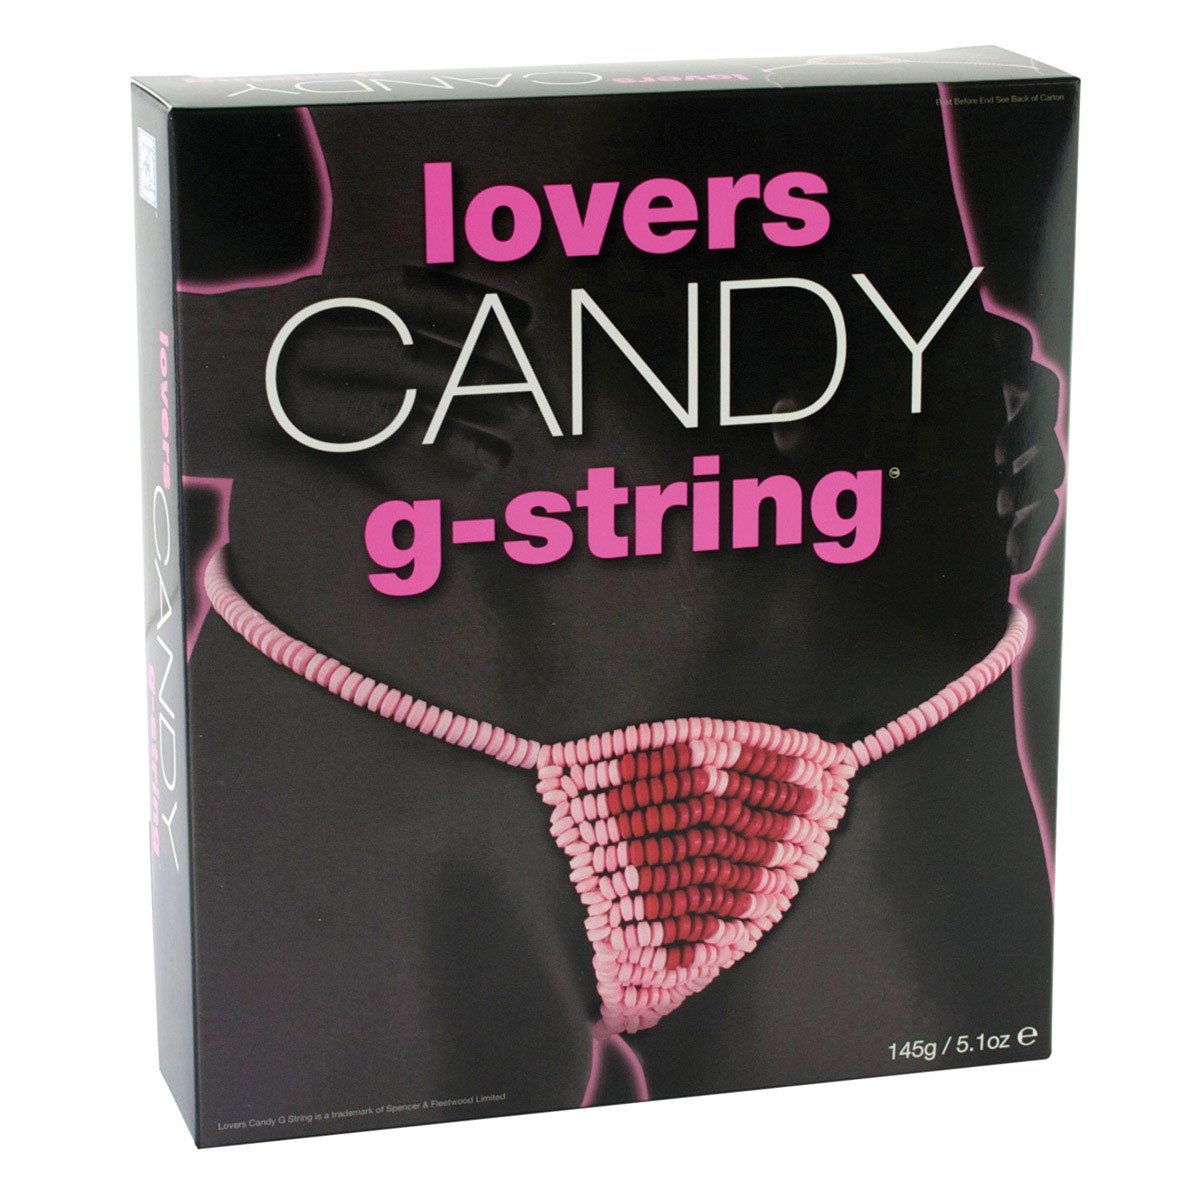 OMG Lovers Candy Heart G-String